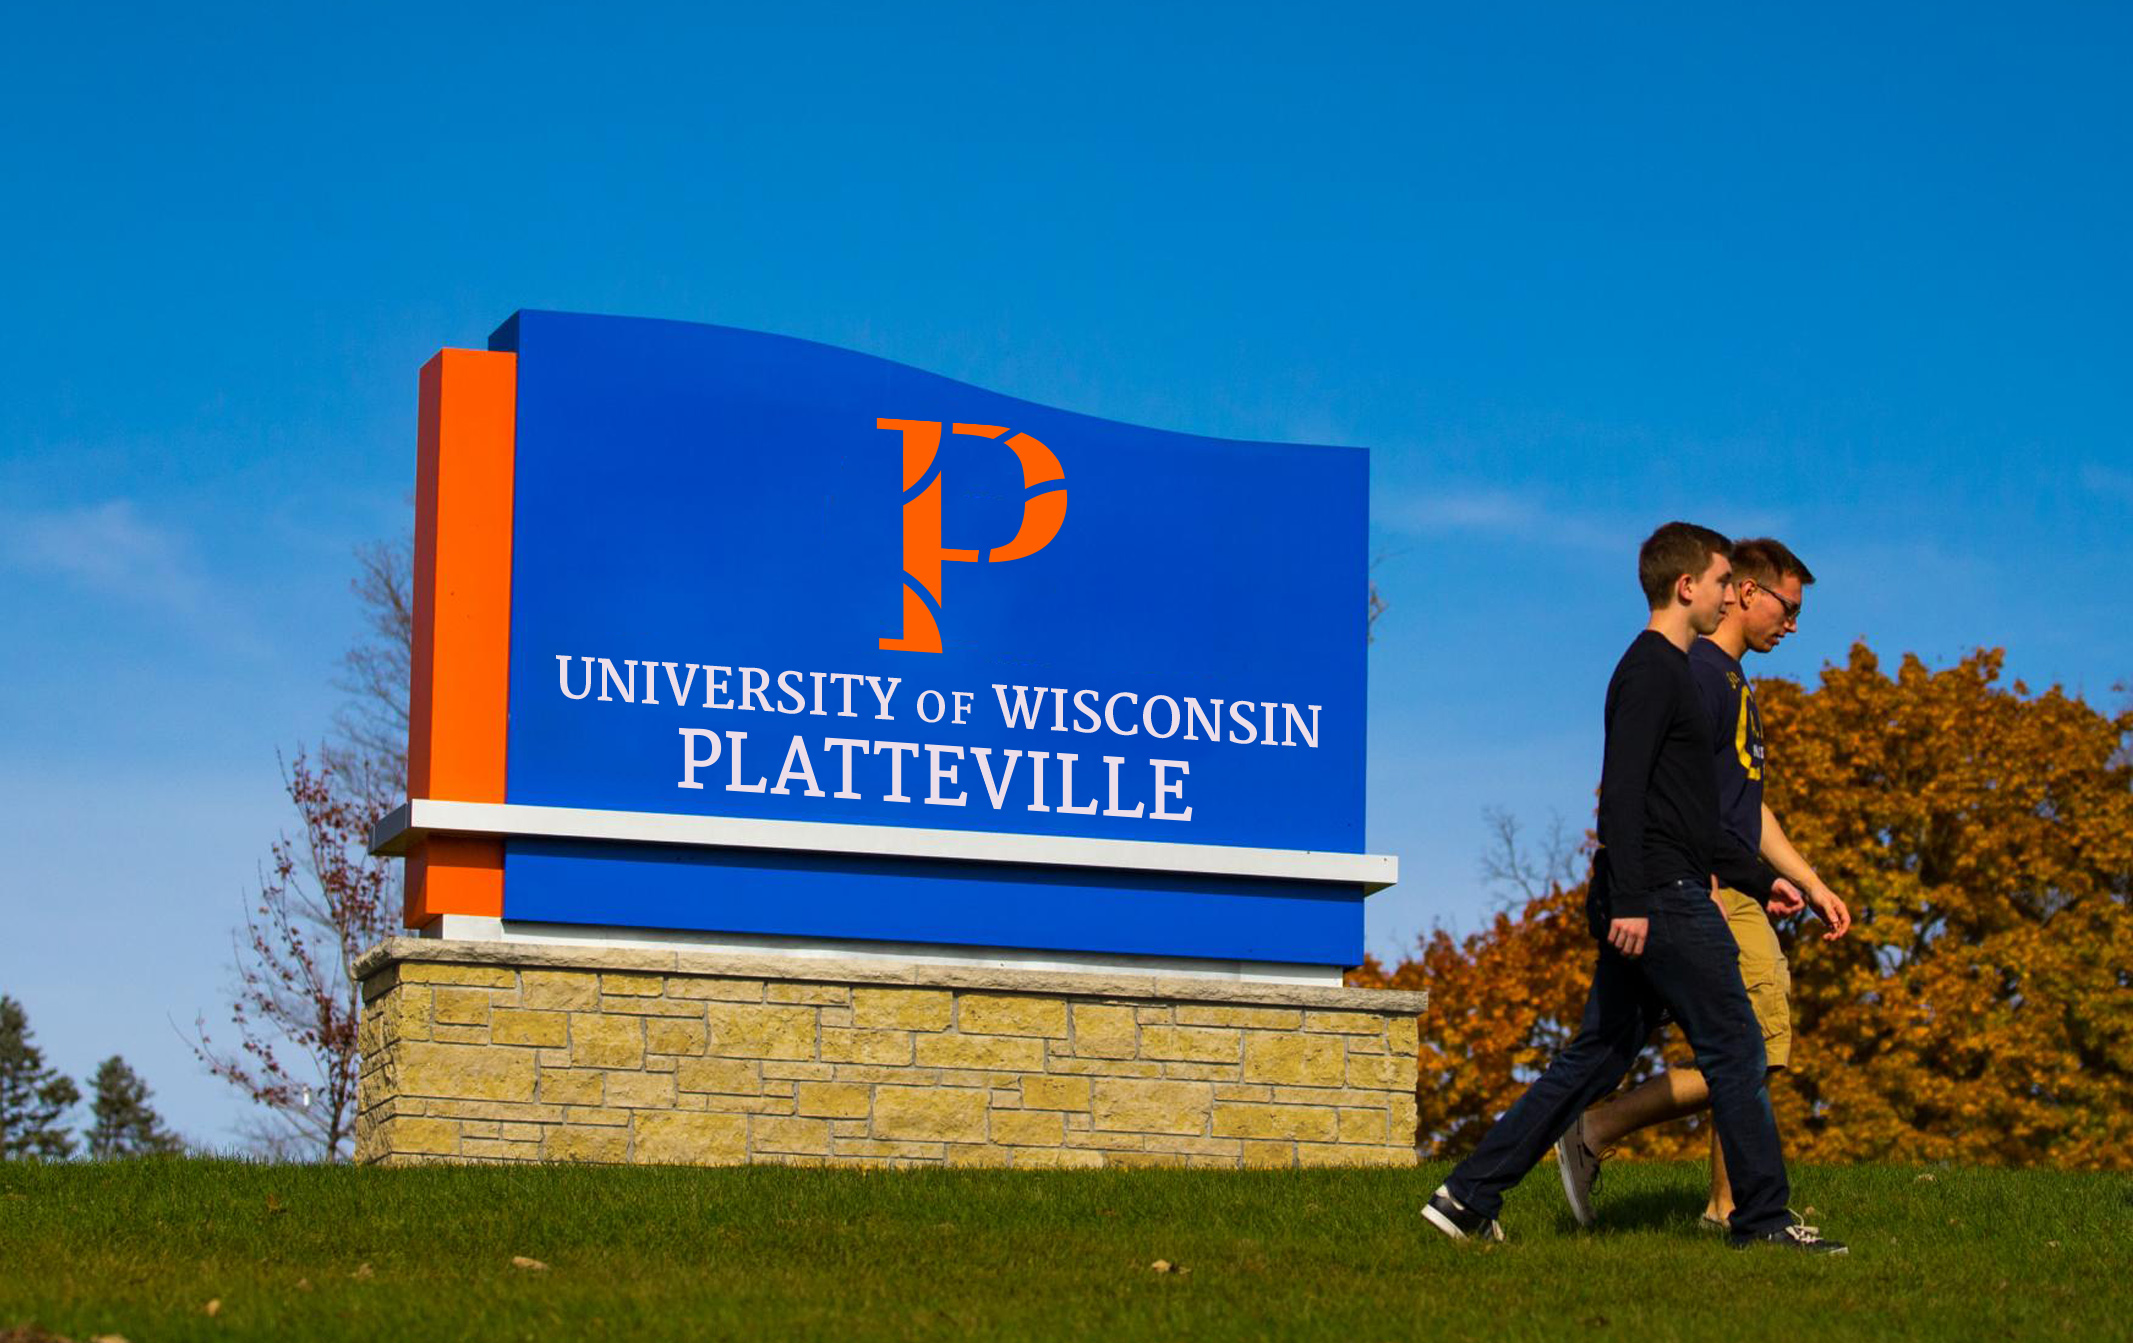 Students walking in front of University of Wisconsin-Platteville outdoor signage displaying the Vendi-created P logo